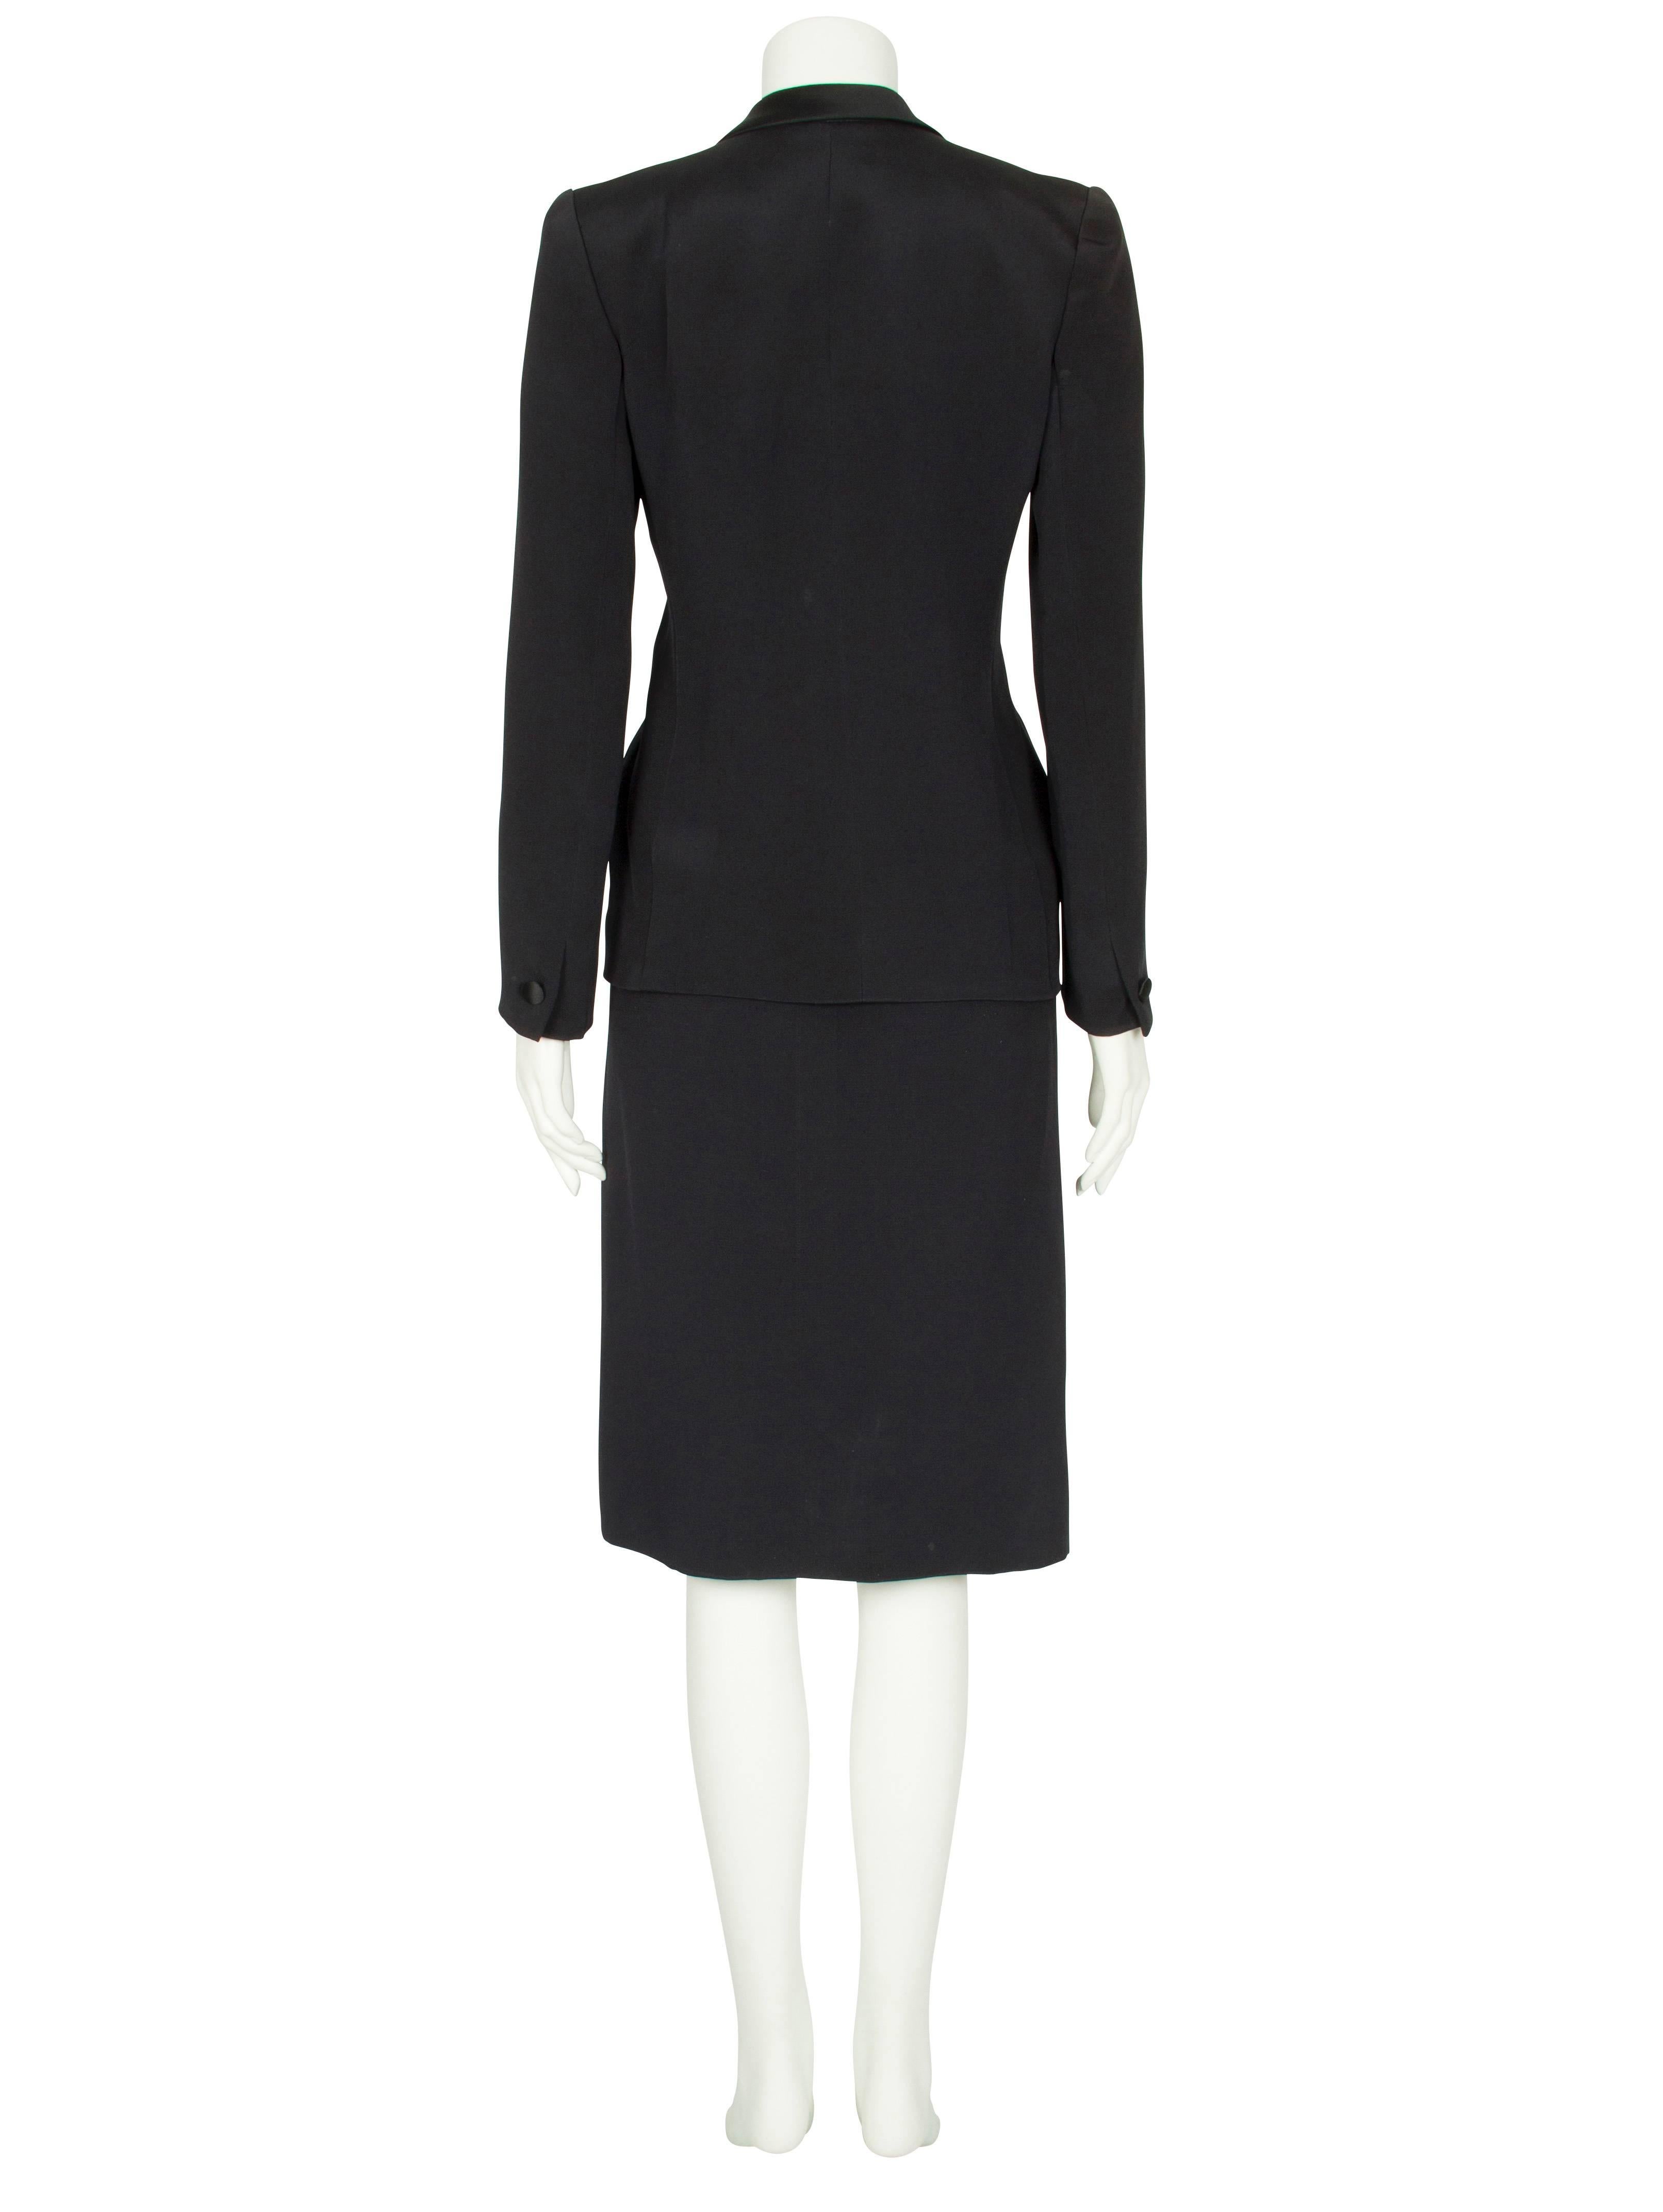 A/W 1980 Dior Couture Navy Silk Satin Double Breasted Jacket & Wrap Skirt Suit In Excellent Condition For Sale In London, GB